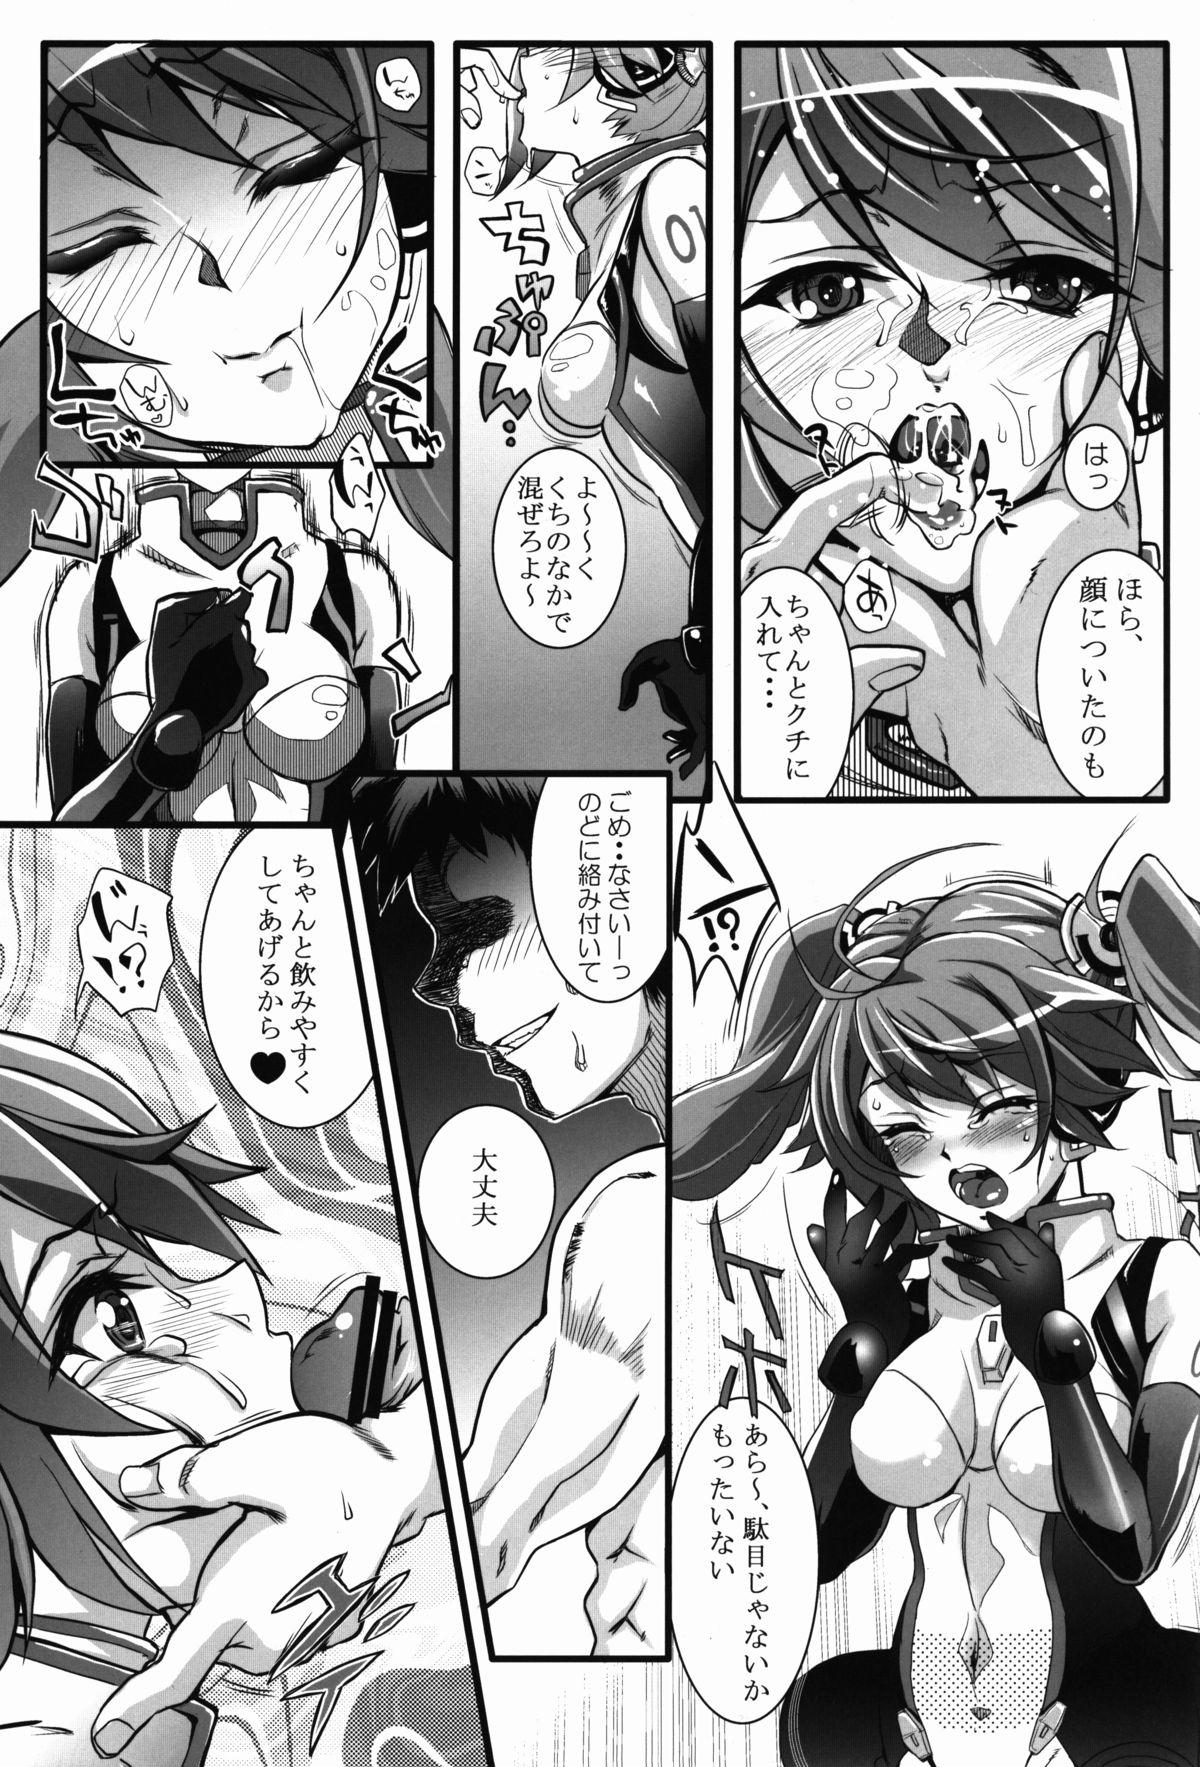 Man Racing Angeloid - Vocaloid Cum In Mouth - Page 11